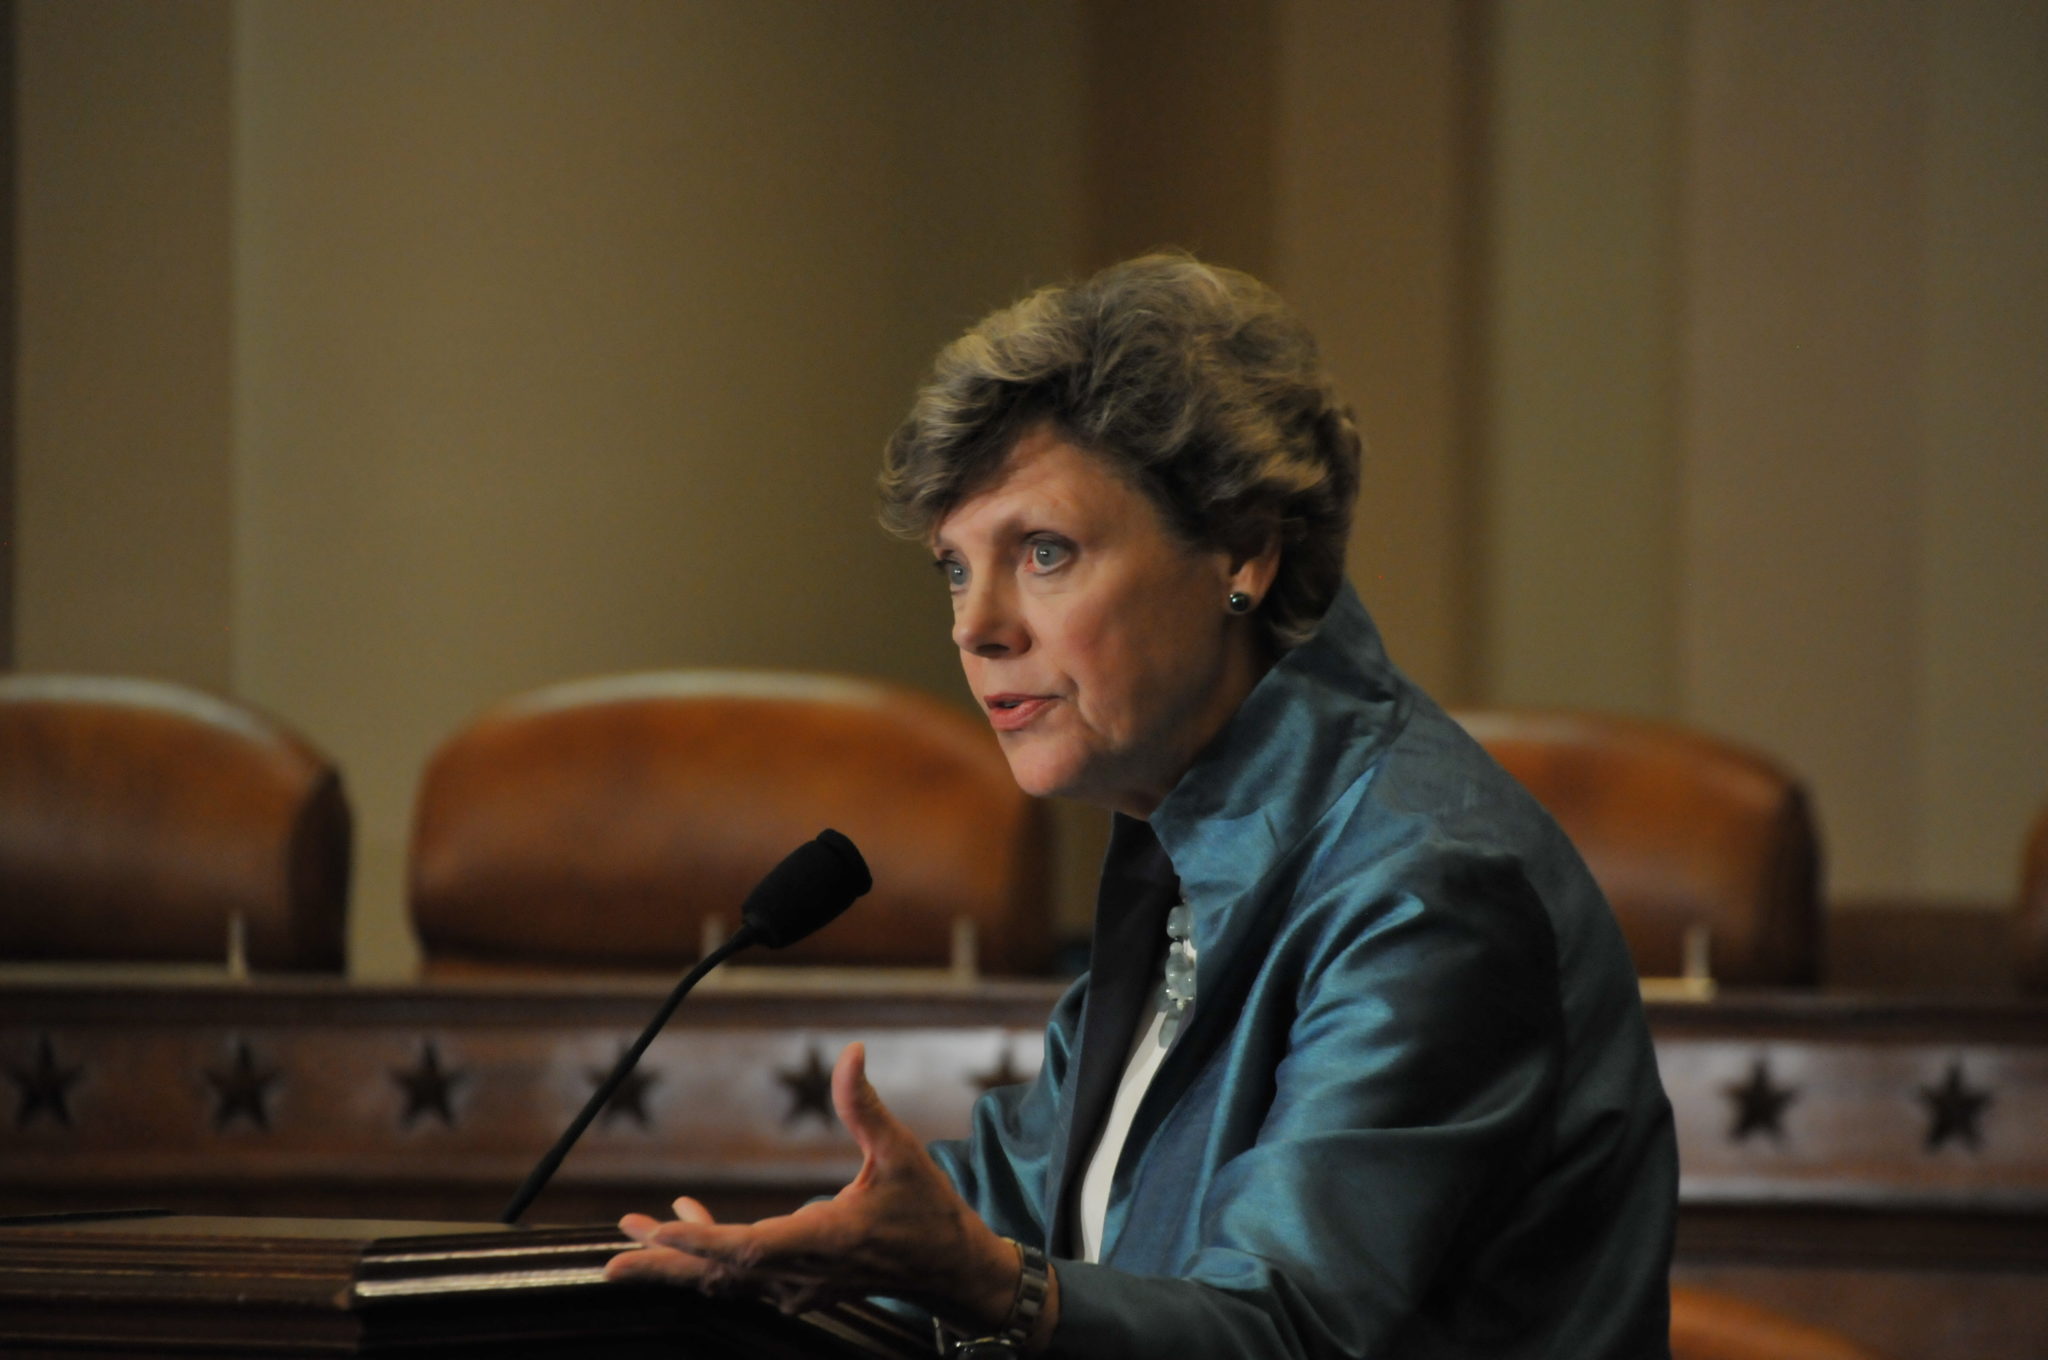 Cokie Roberts gives a sincere and introspective keynote at the 2017 House Committee on Ways and Means Reception. 
Photos (c) Bruce Guthrie